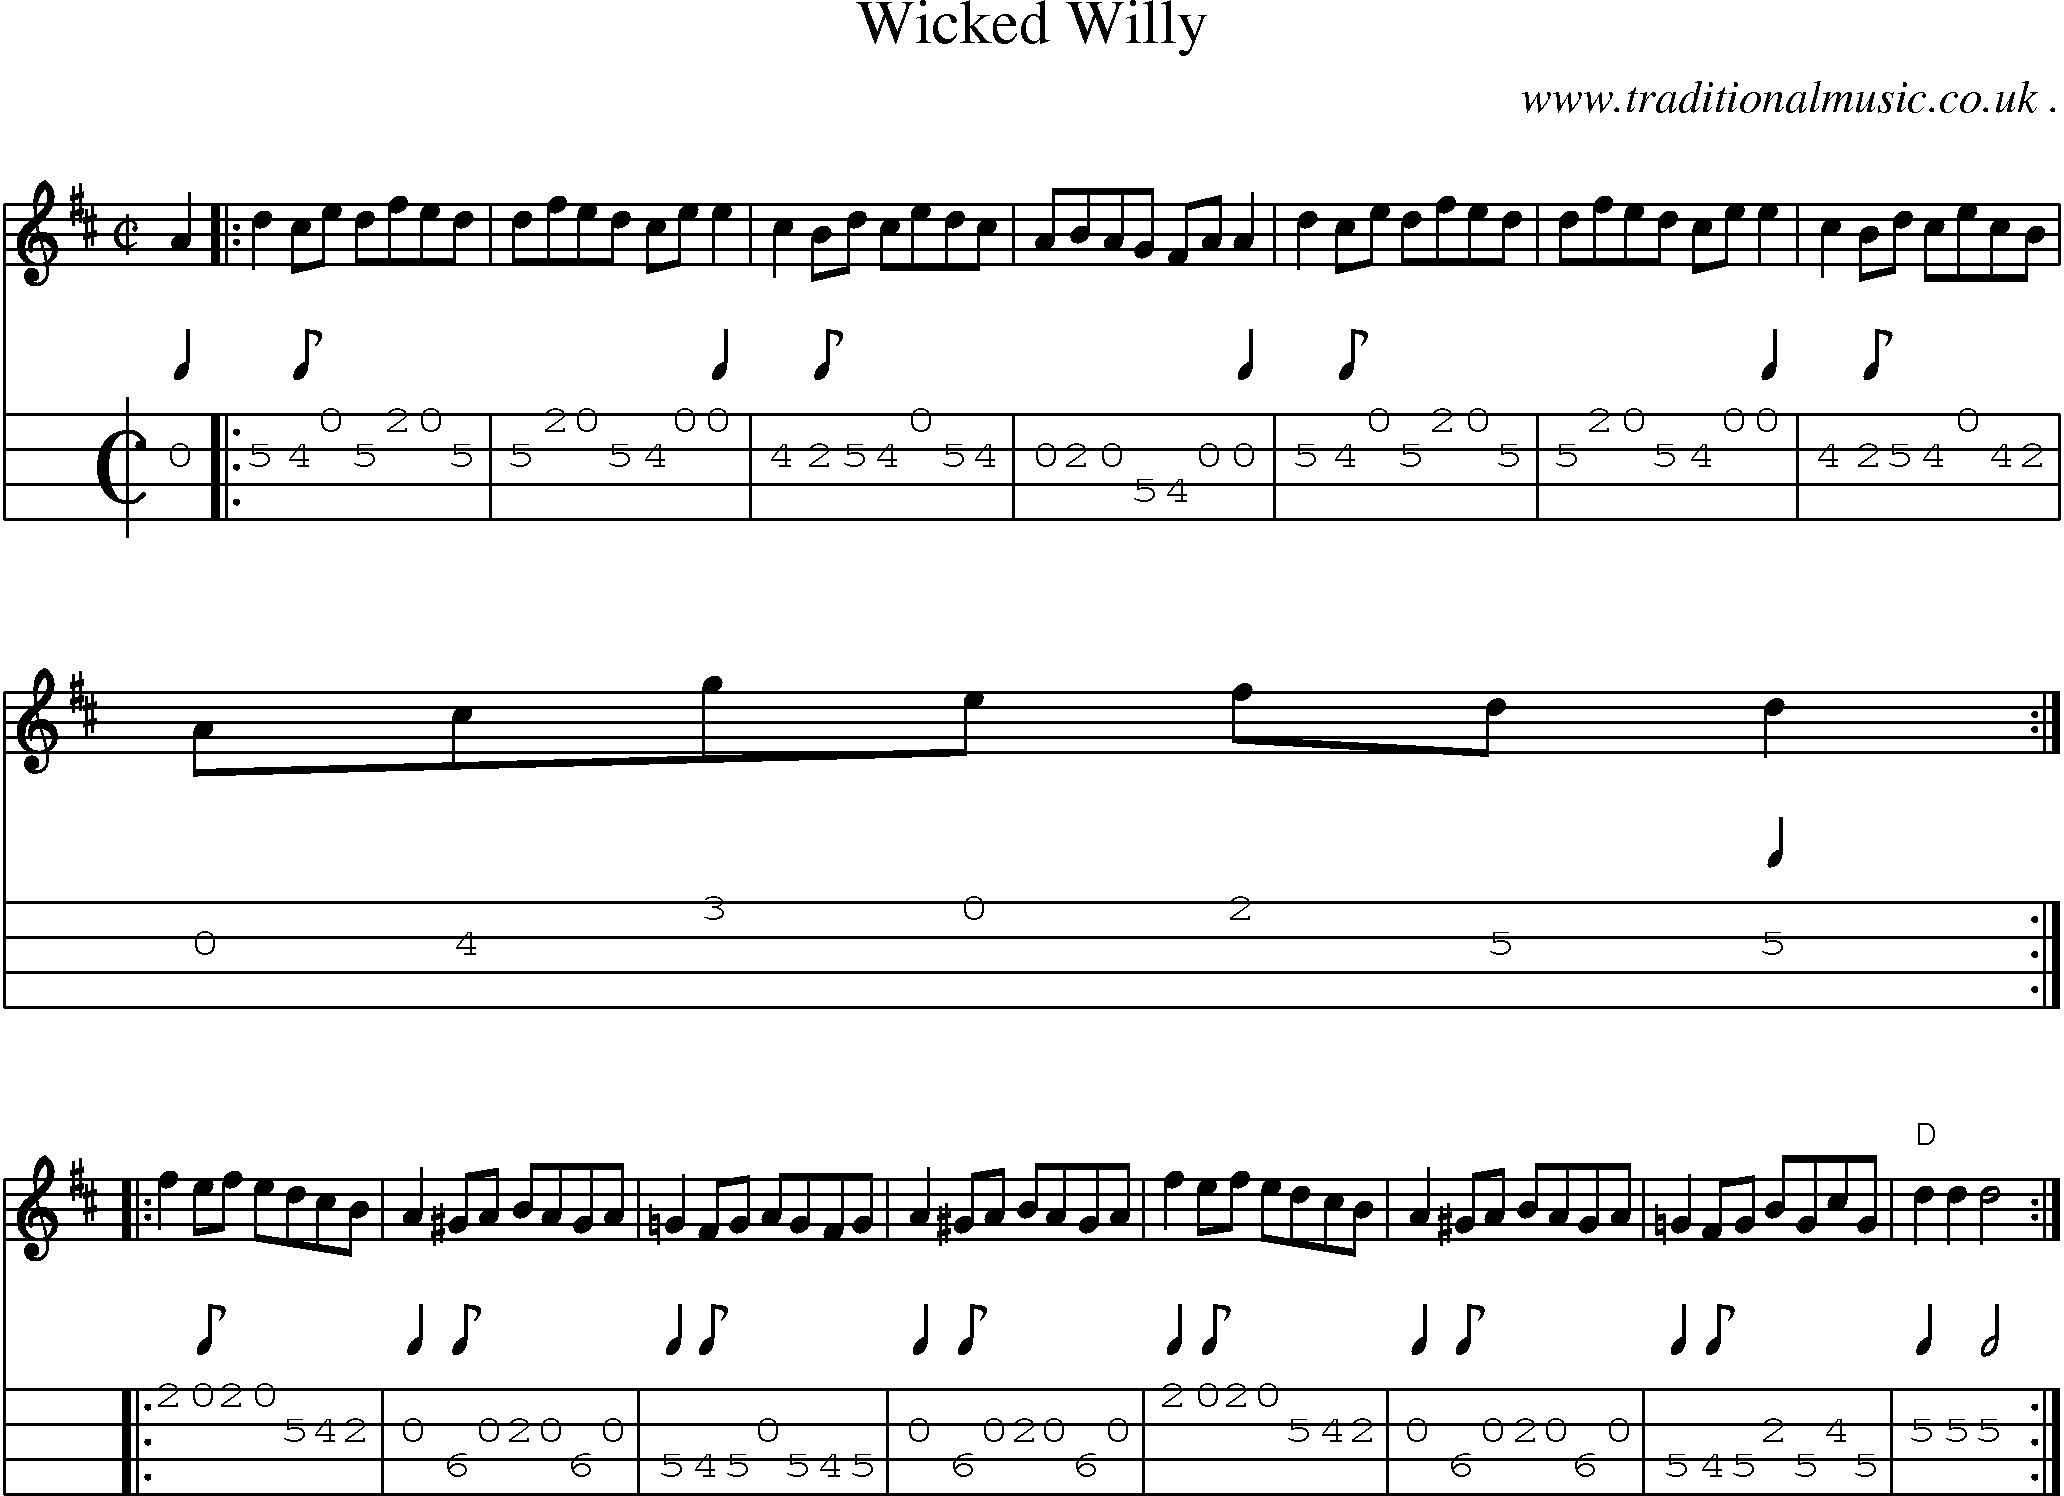 Sheet-music  score, Chords and Mandolin Tabs for Wicked Willy